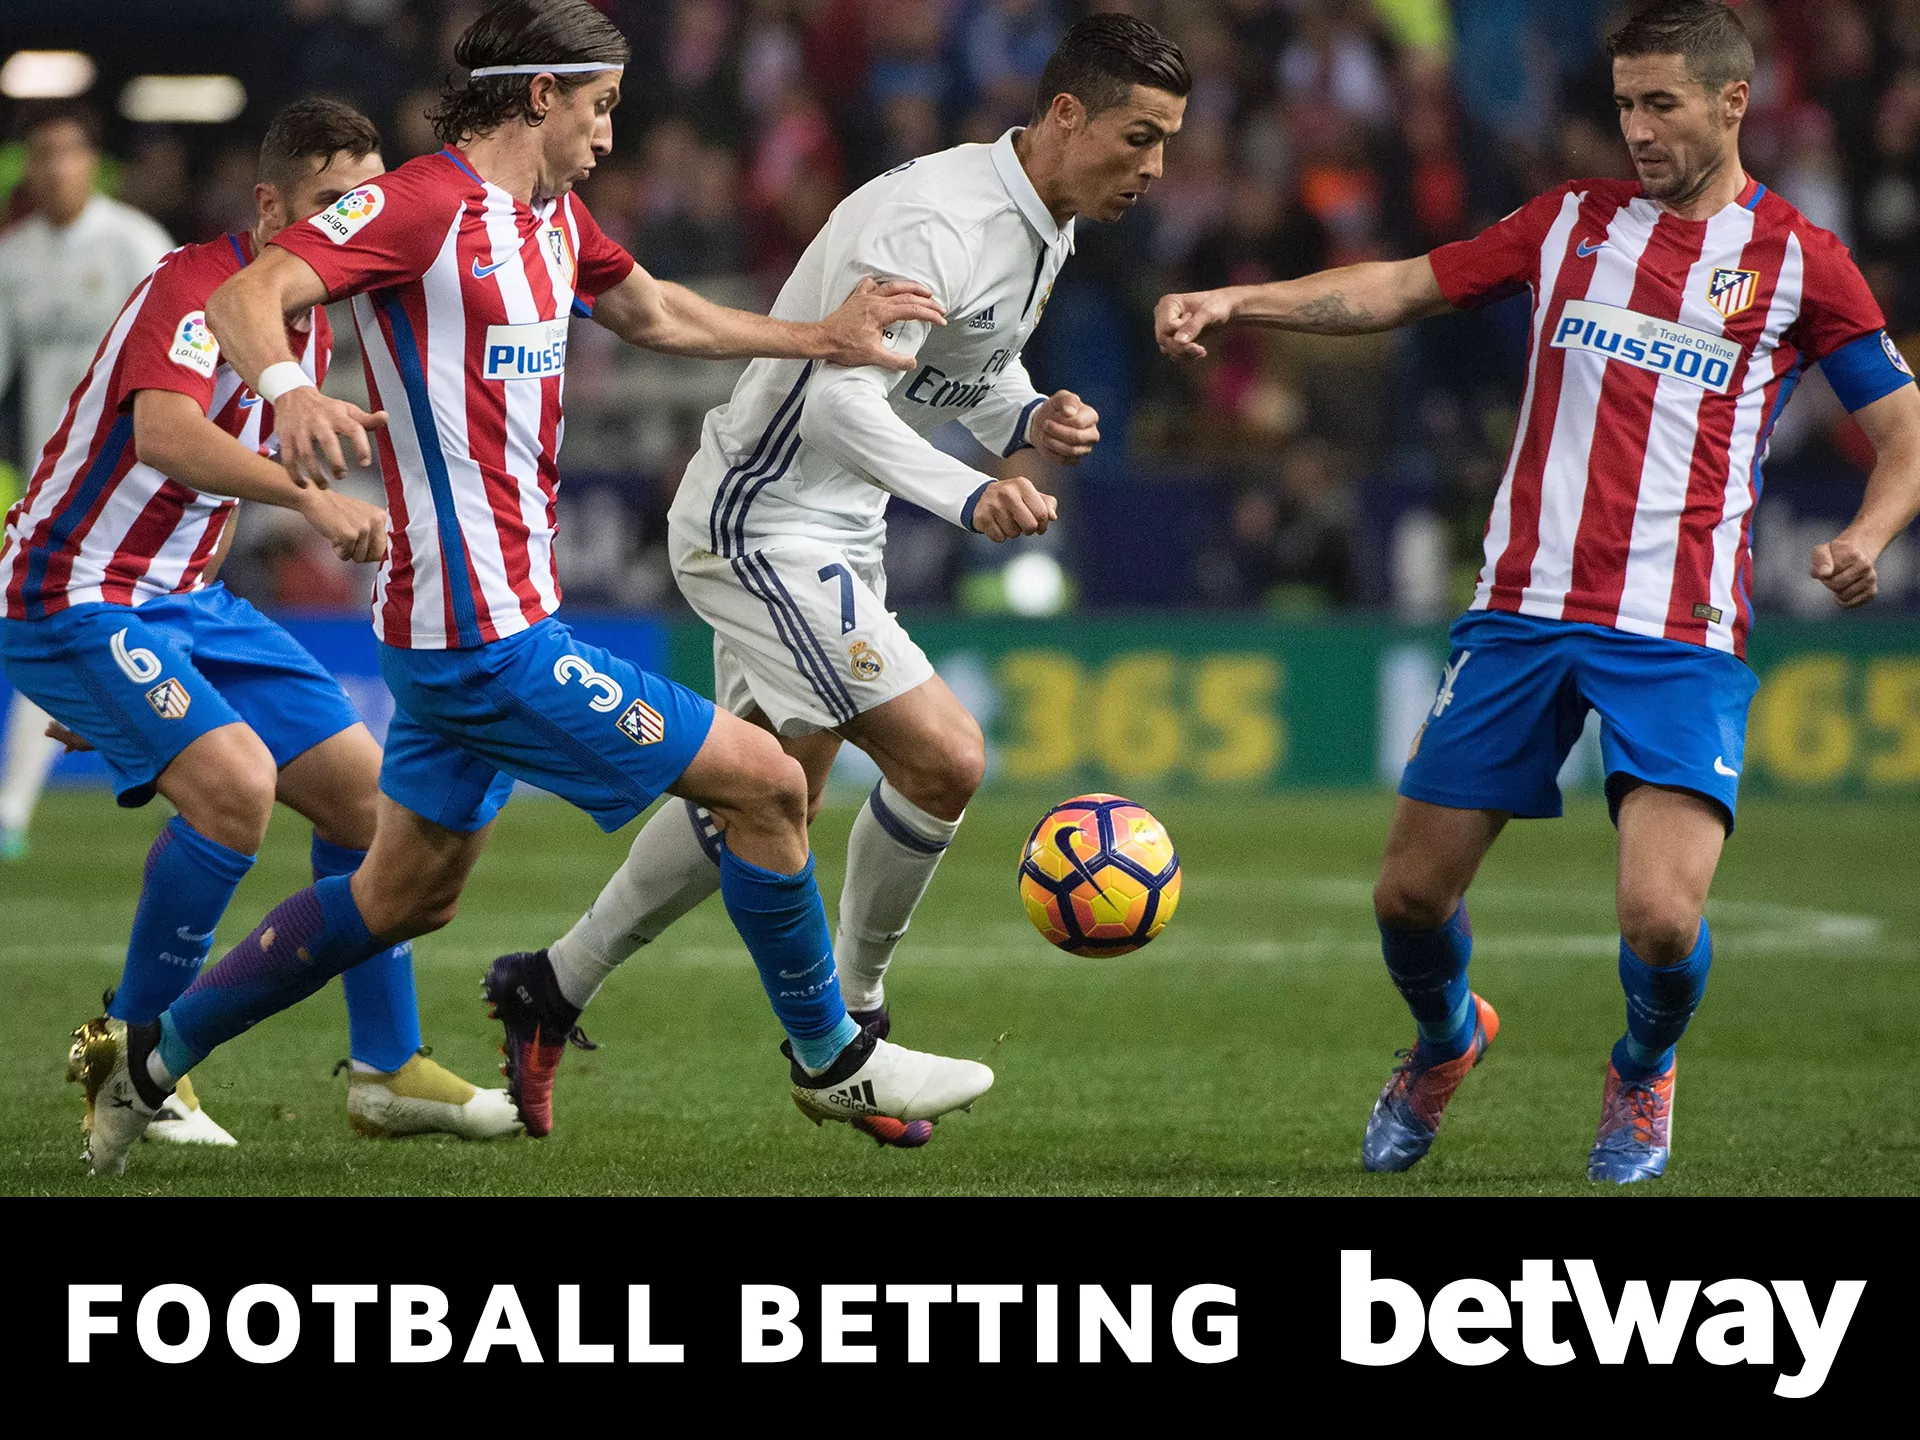 Football betting on Betway.